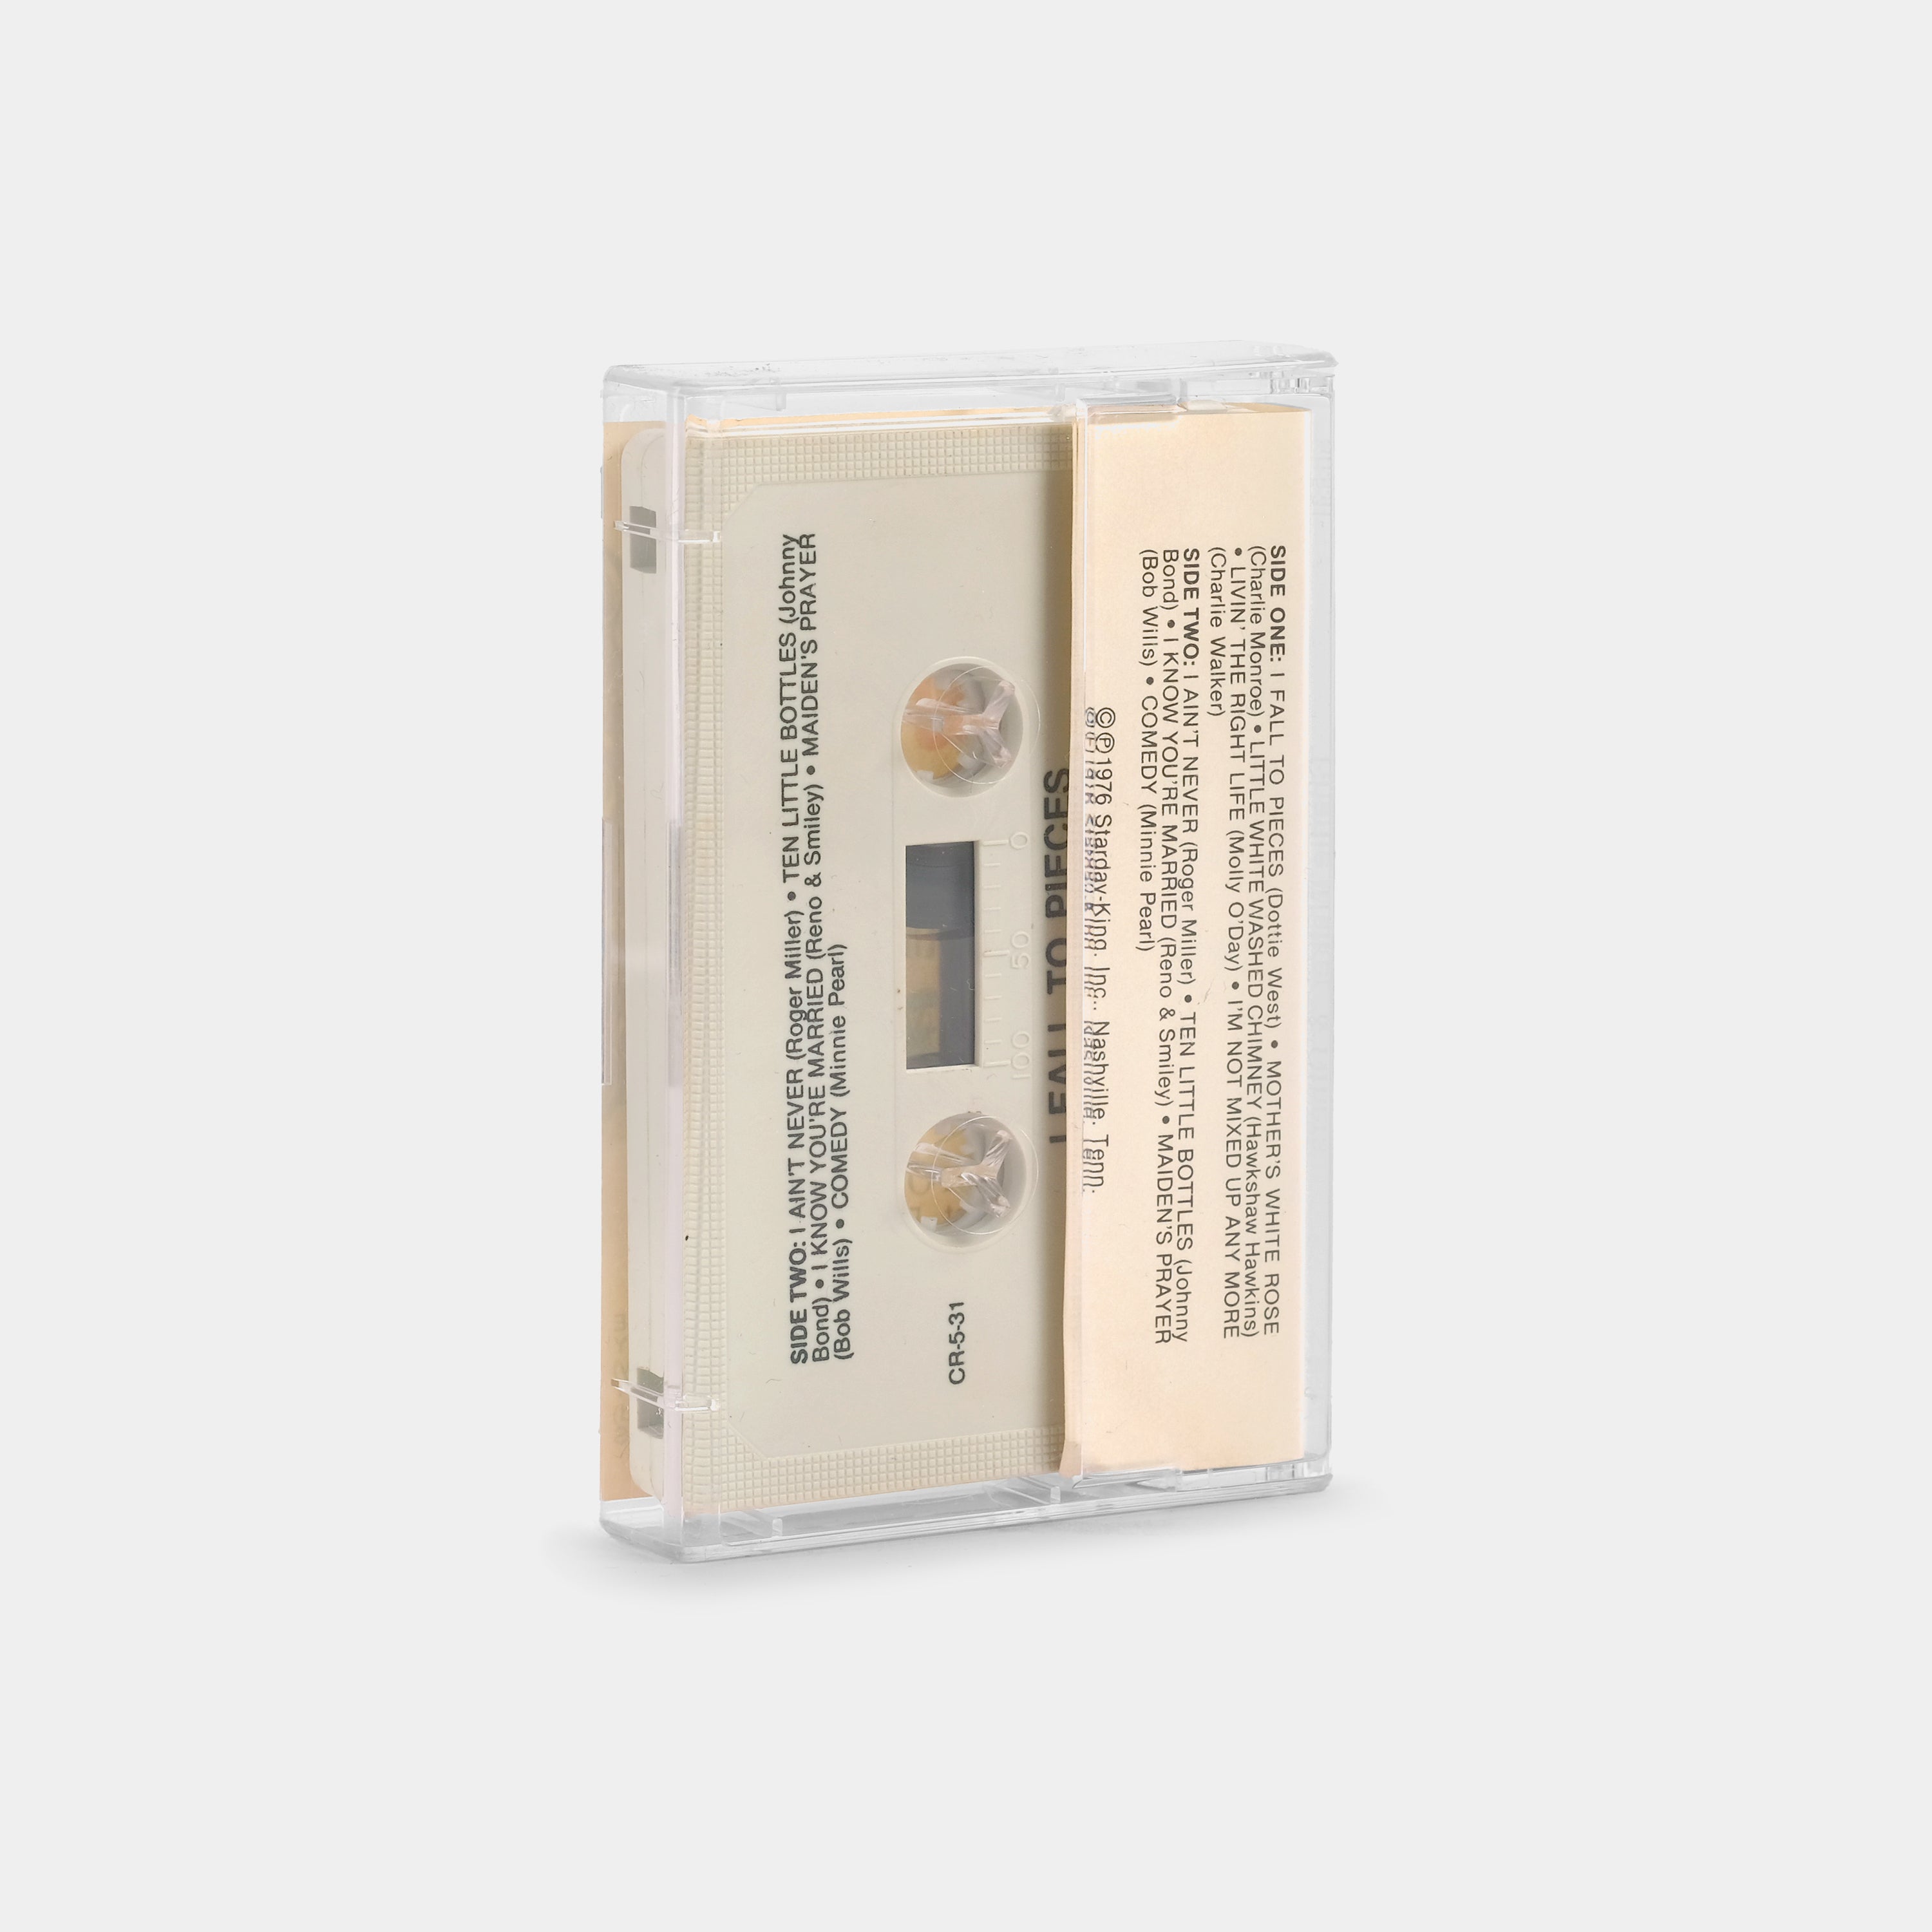 I Fall To Pieces Cassette Tape